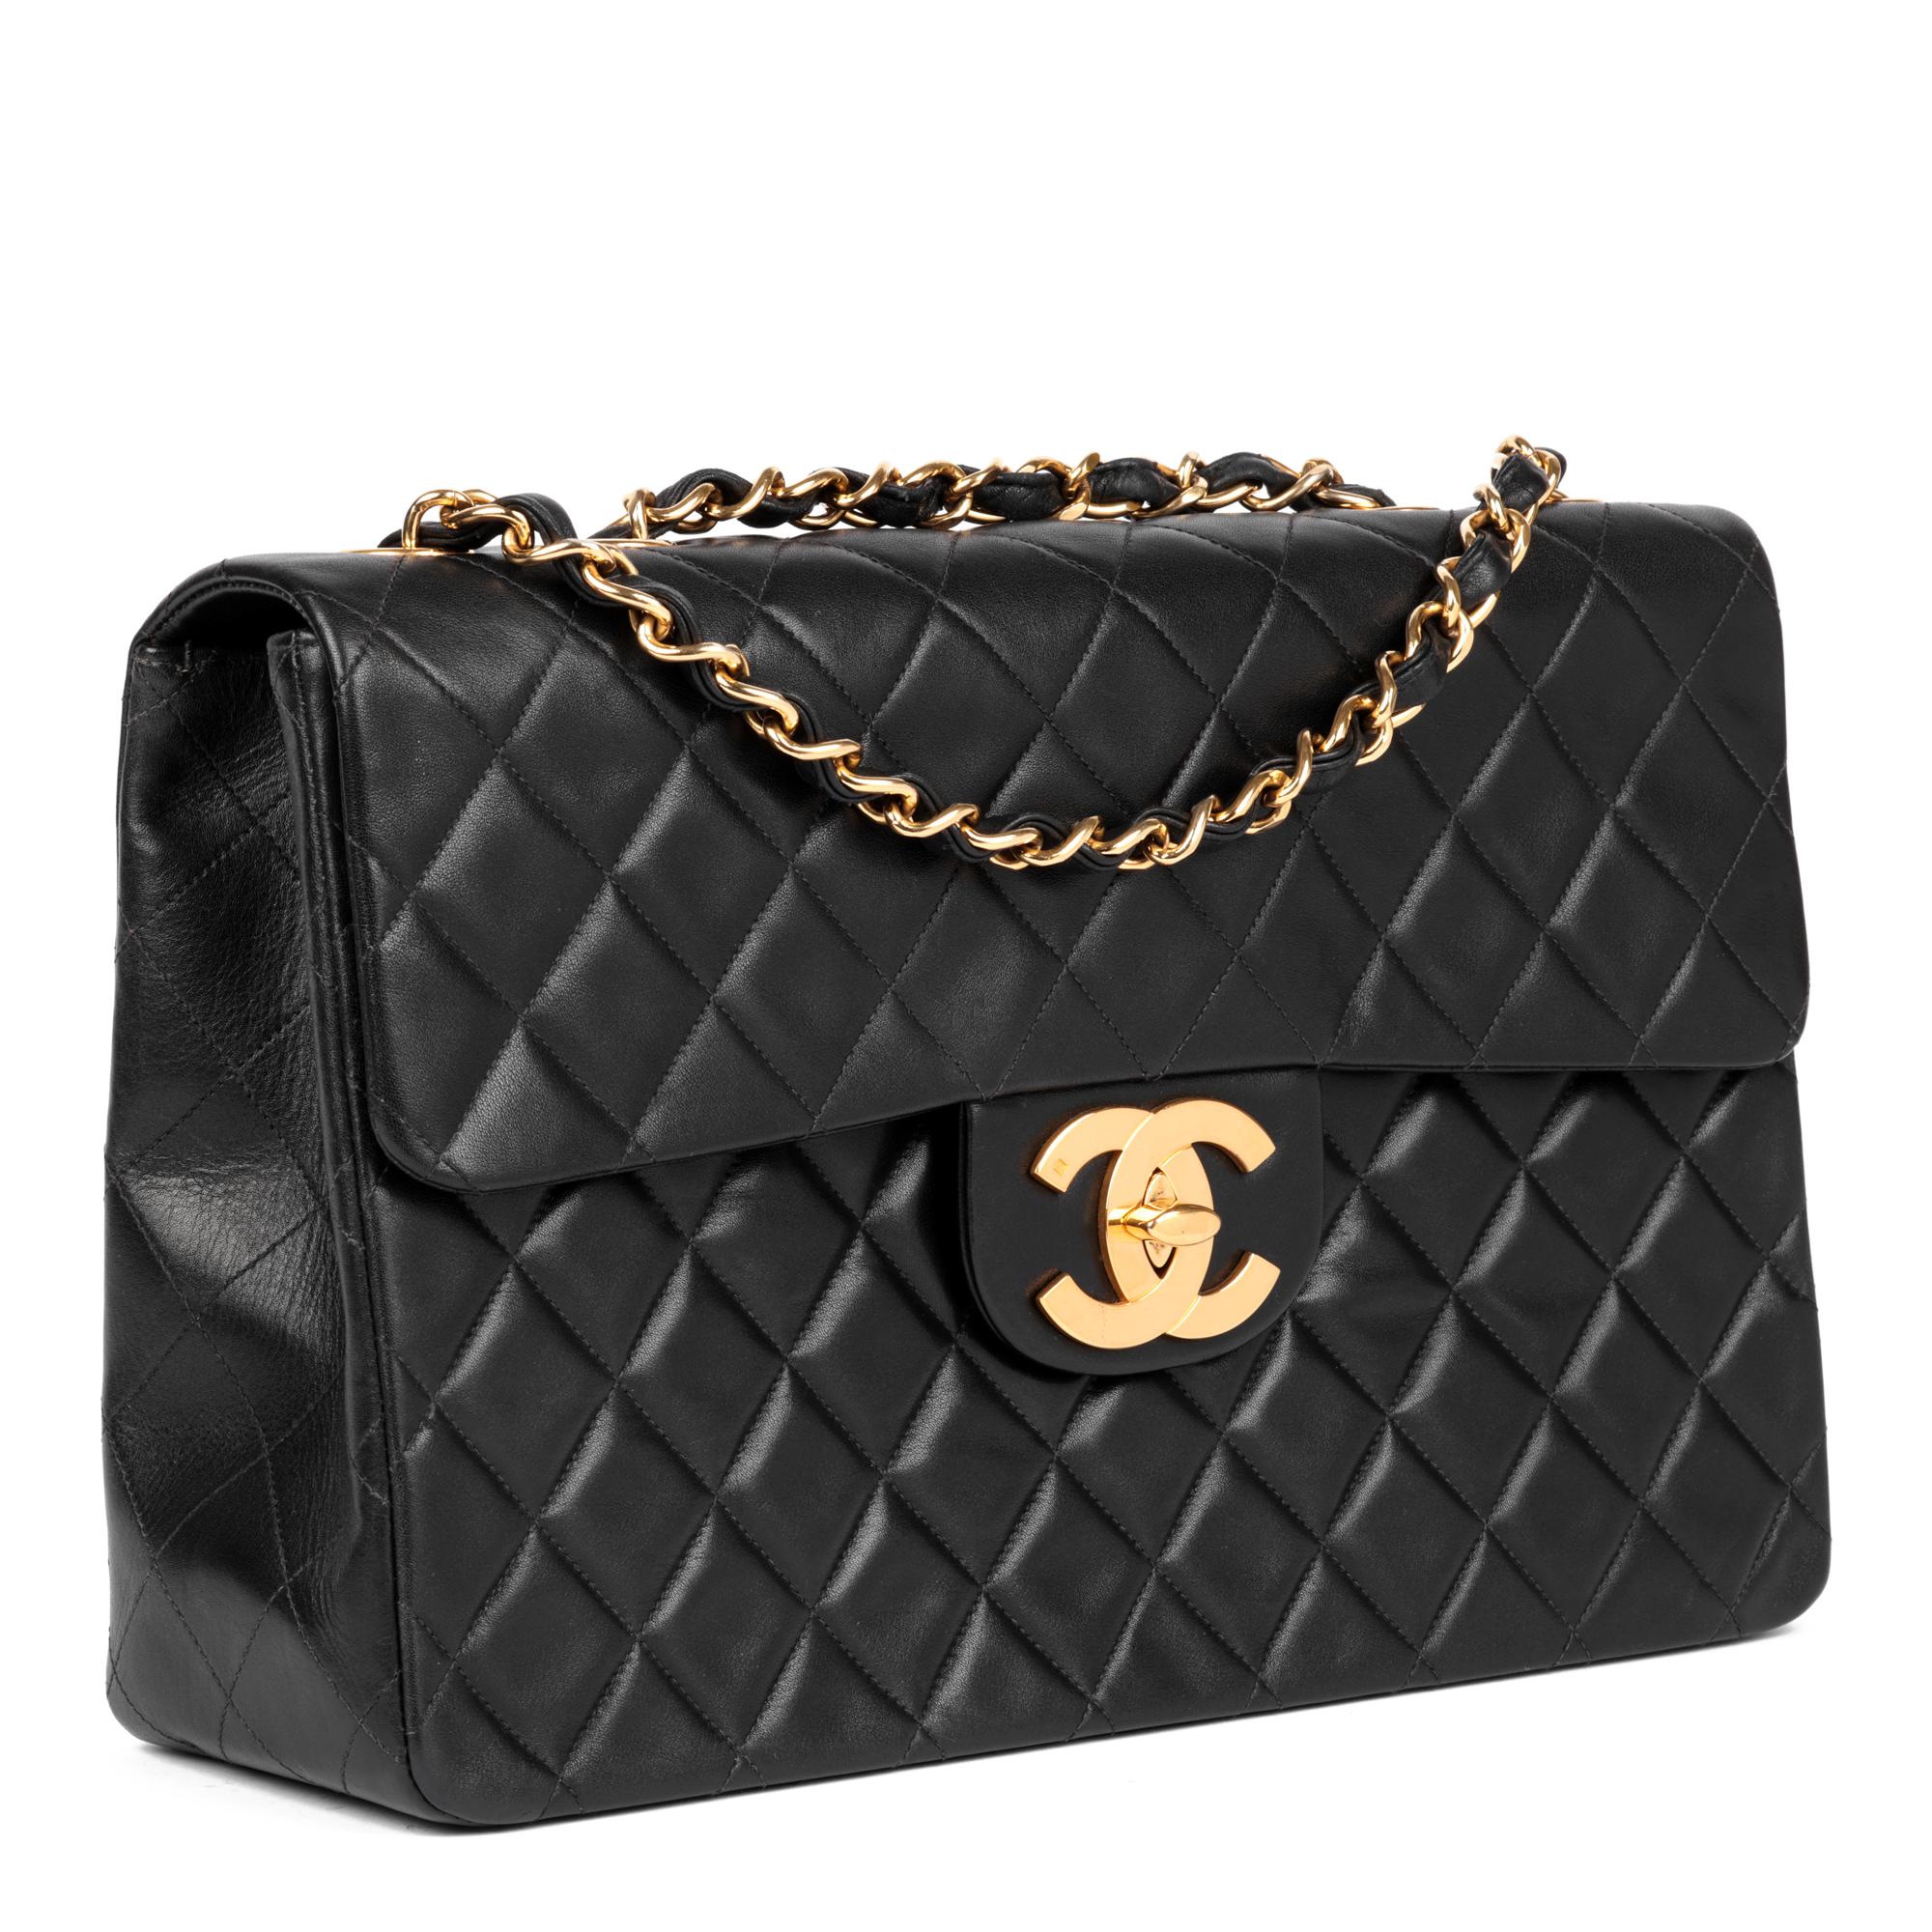 CHANEL
Black Quilted Lambskin Maxi Jumbo XL Classic Single Flap Bag

Serial Number: 3954557
Age (Circa): 1996
Accompanied By: Chanel Dust Bag, Care Booklet, Authenticity Card
Authenticity Details:  Authenticity Card, Serial Sticker (Made in